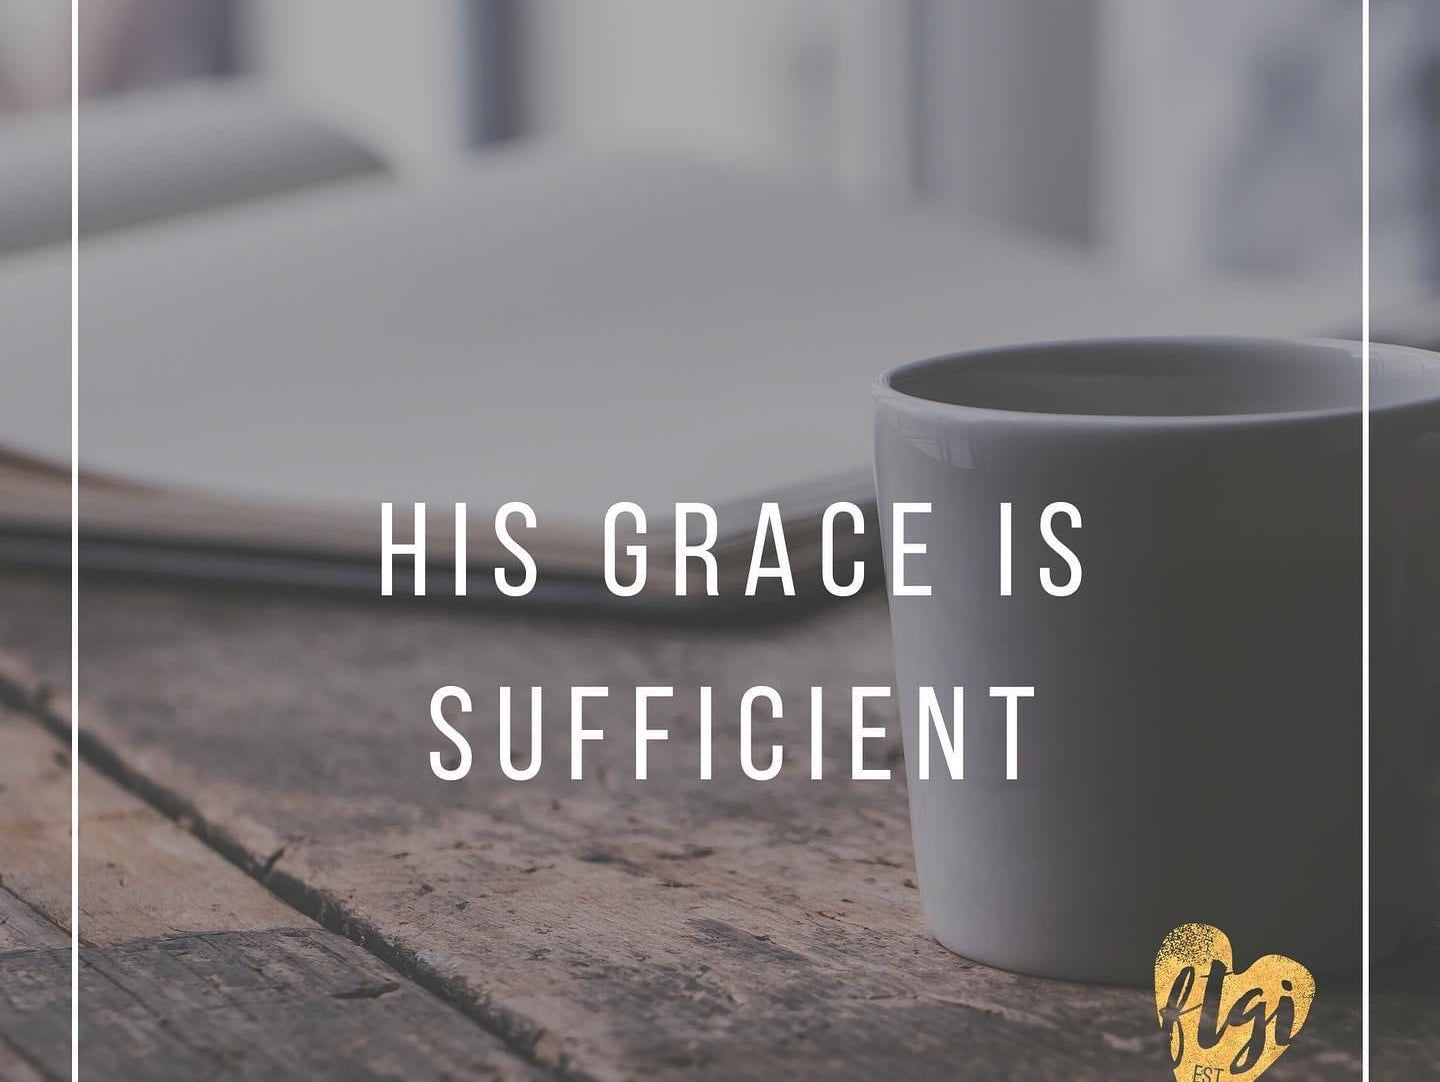 HIS GRACE IS SUFFICIENT